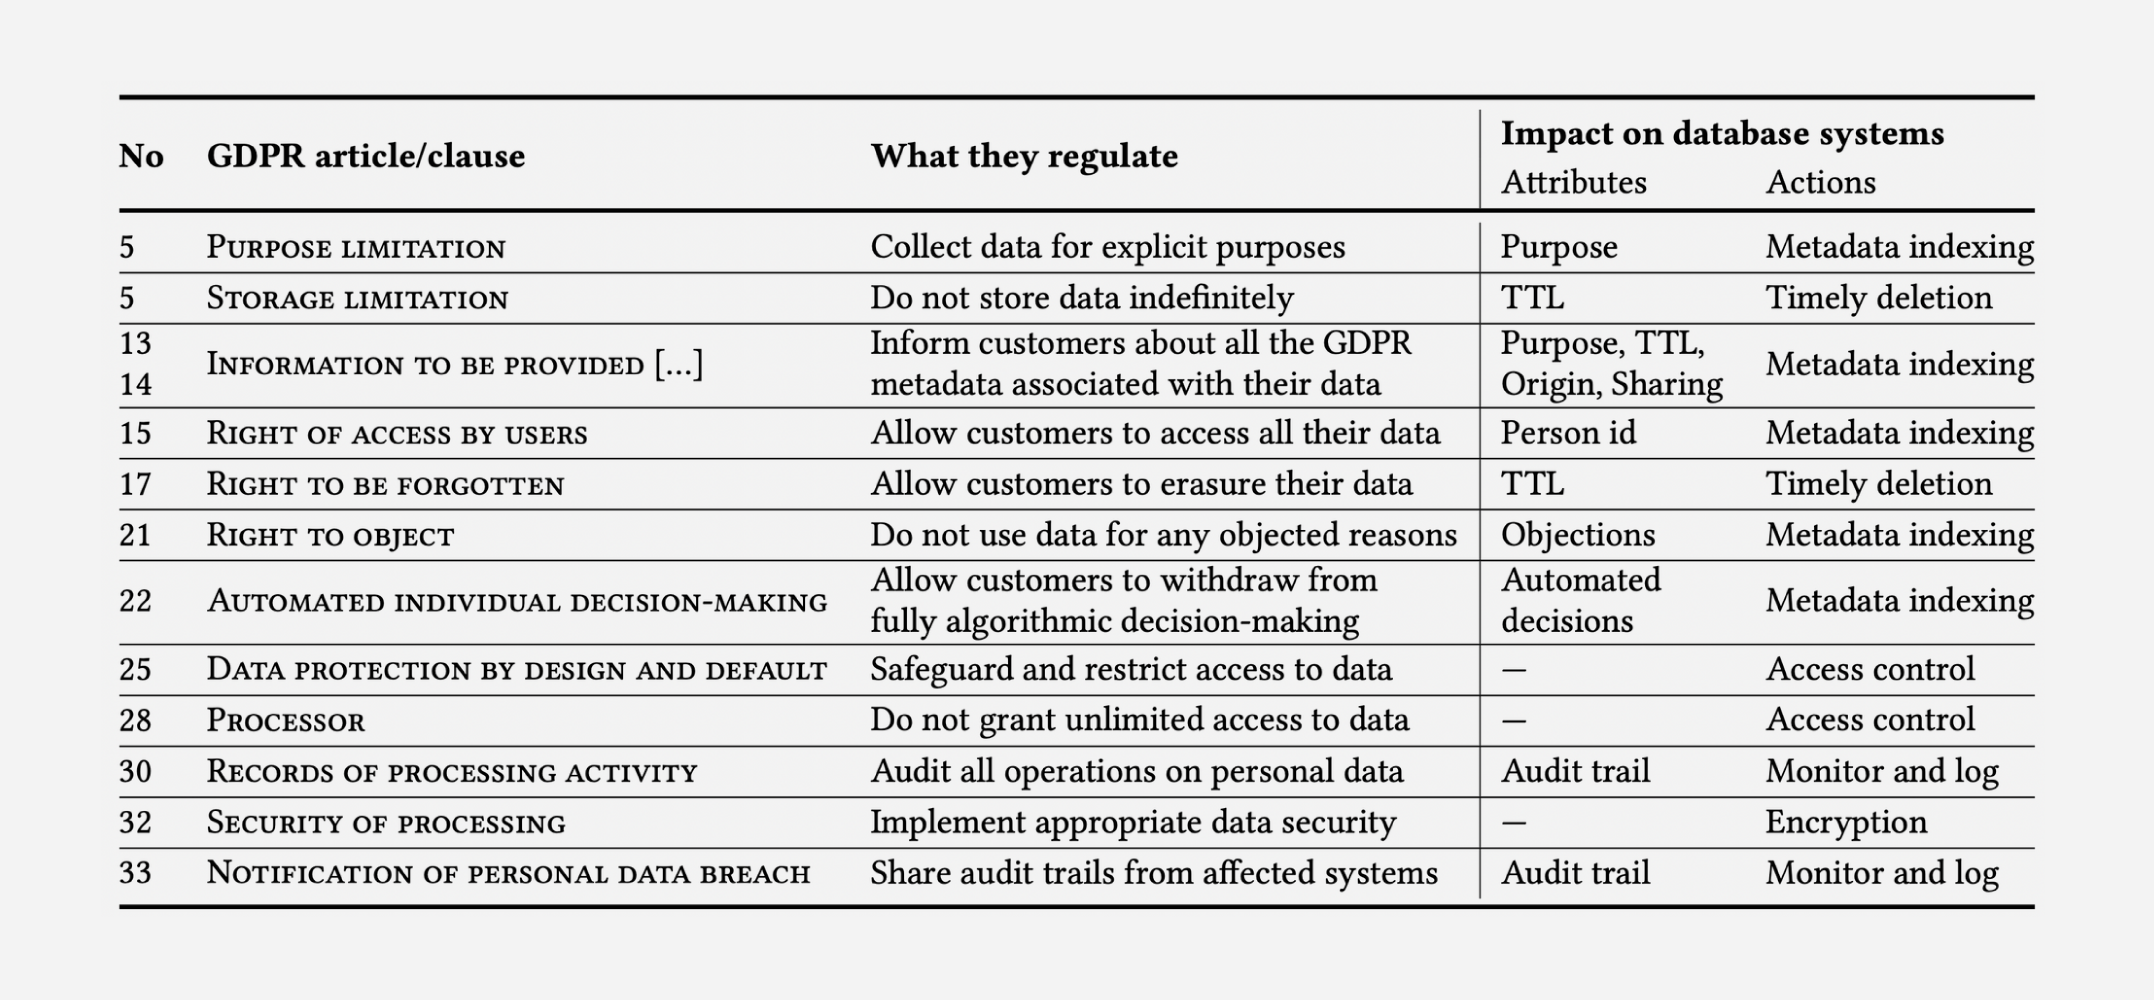 Figure 2. Shows how GDPR compliance can impact database systems